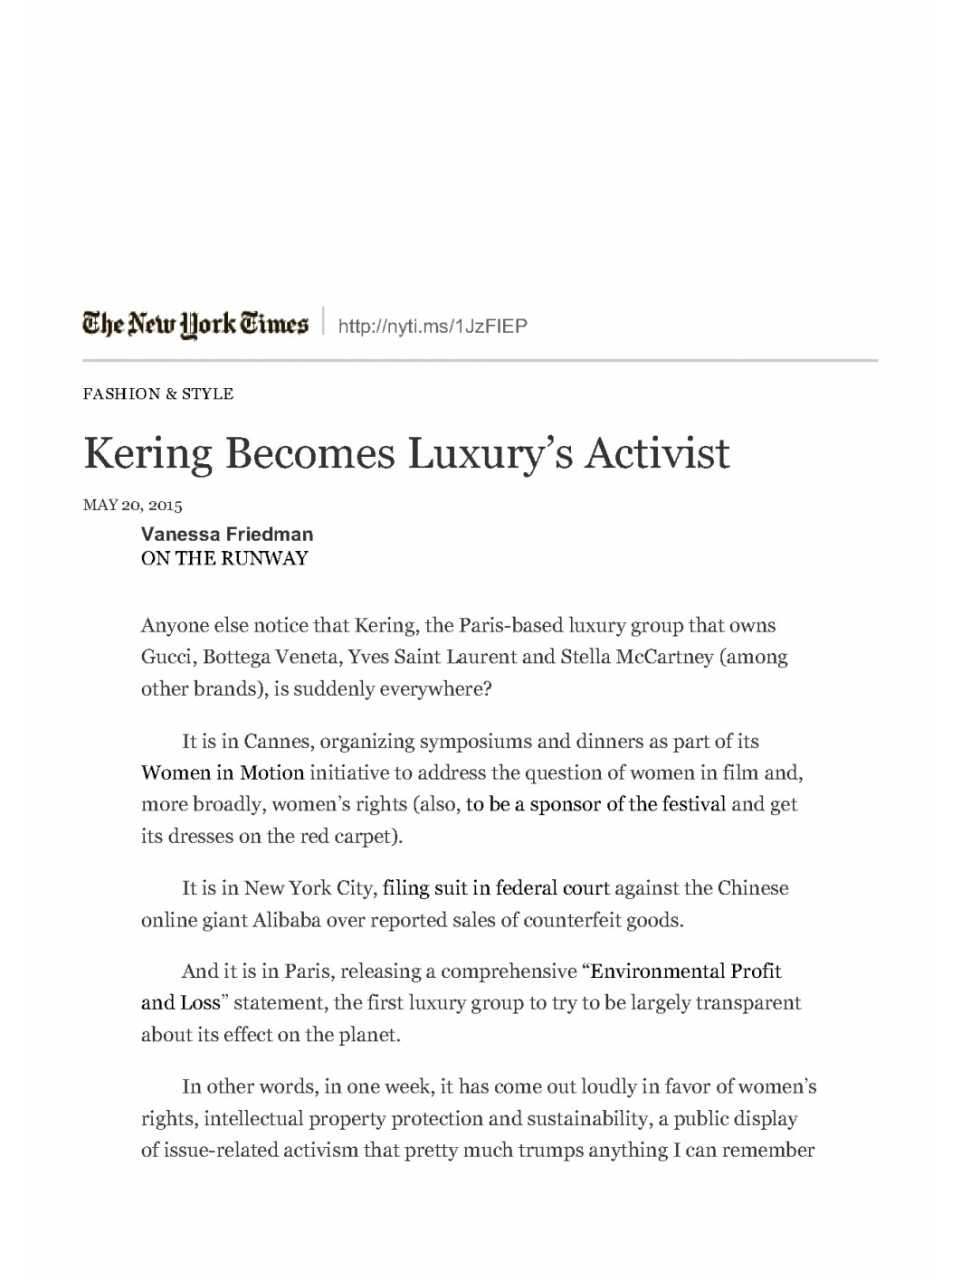 Kering Becomes Luxury's Activist - The New York Times